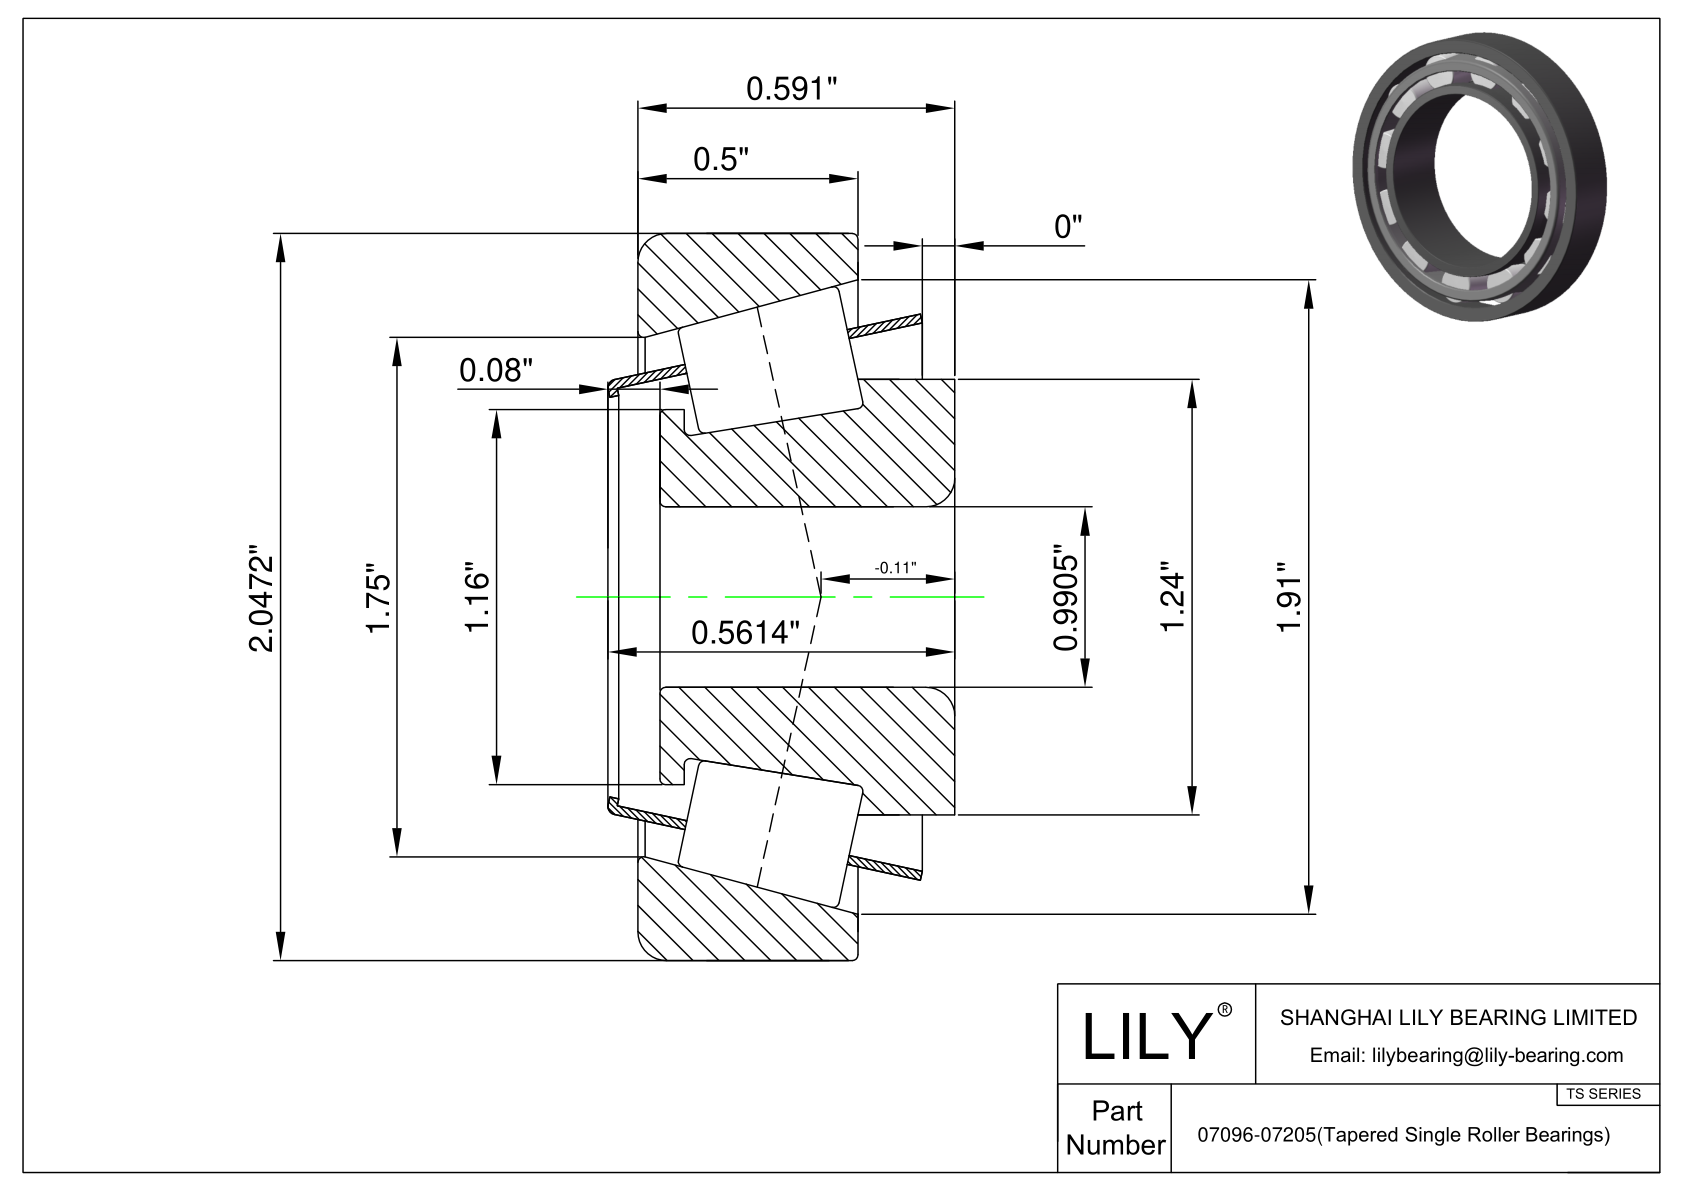 07096-07205 TS (Tapered Single Roller Bearings) (Imperial) cad drawing